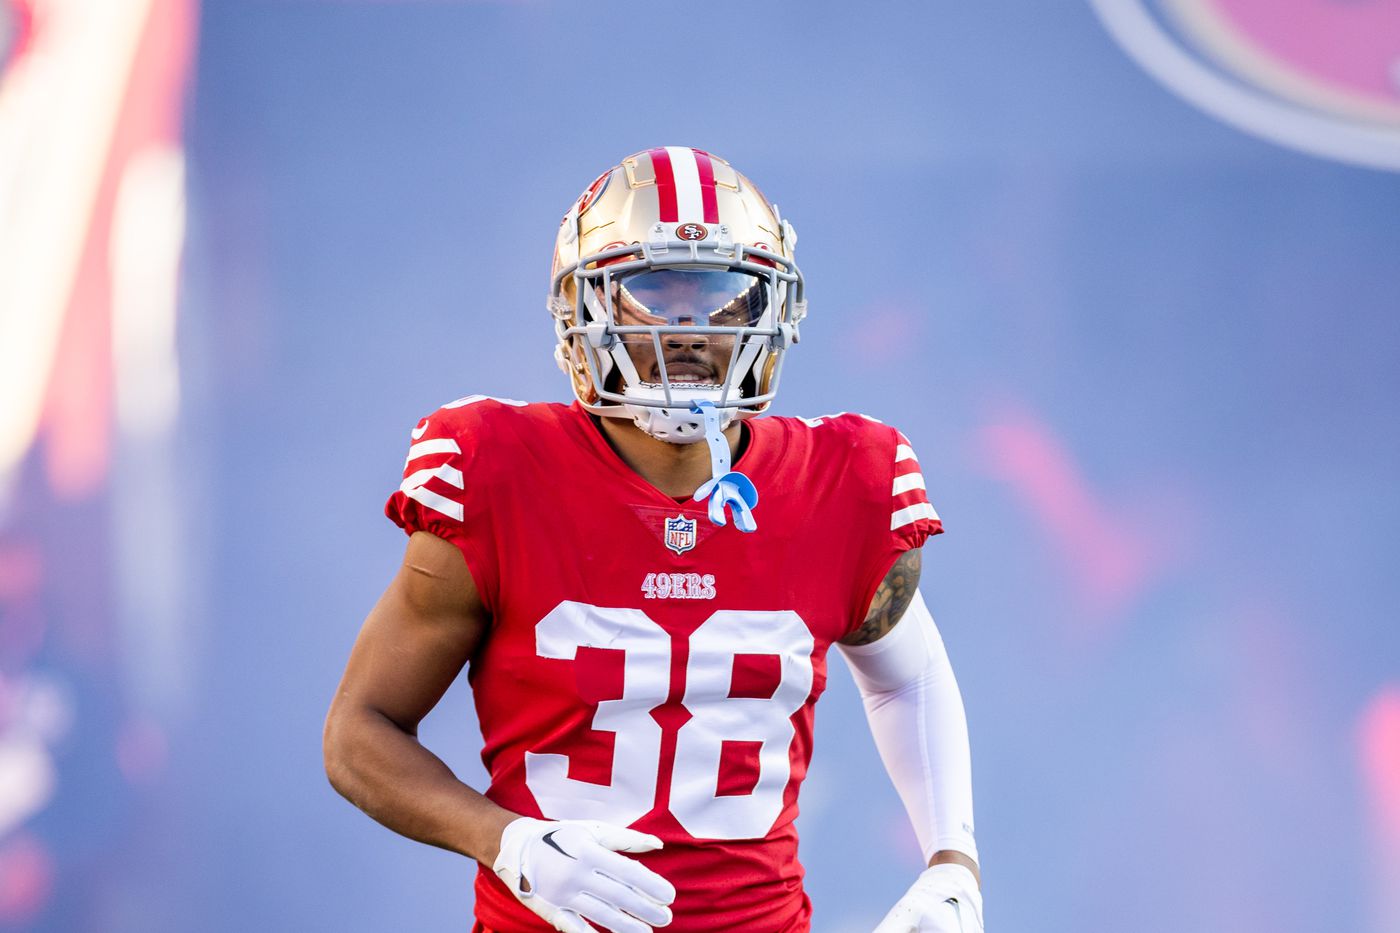 49ers news: 5 players on the 49ers who should wear No. 0 - Niners Nation